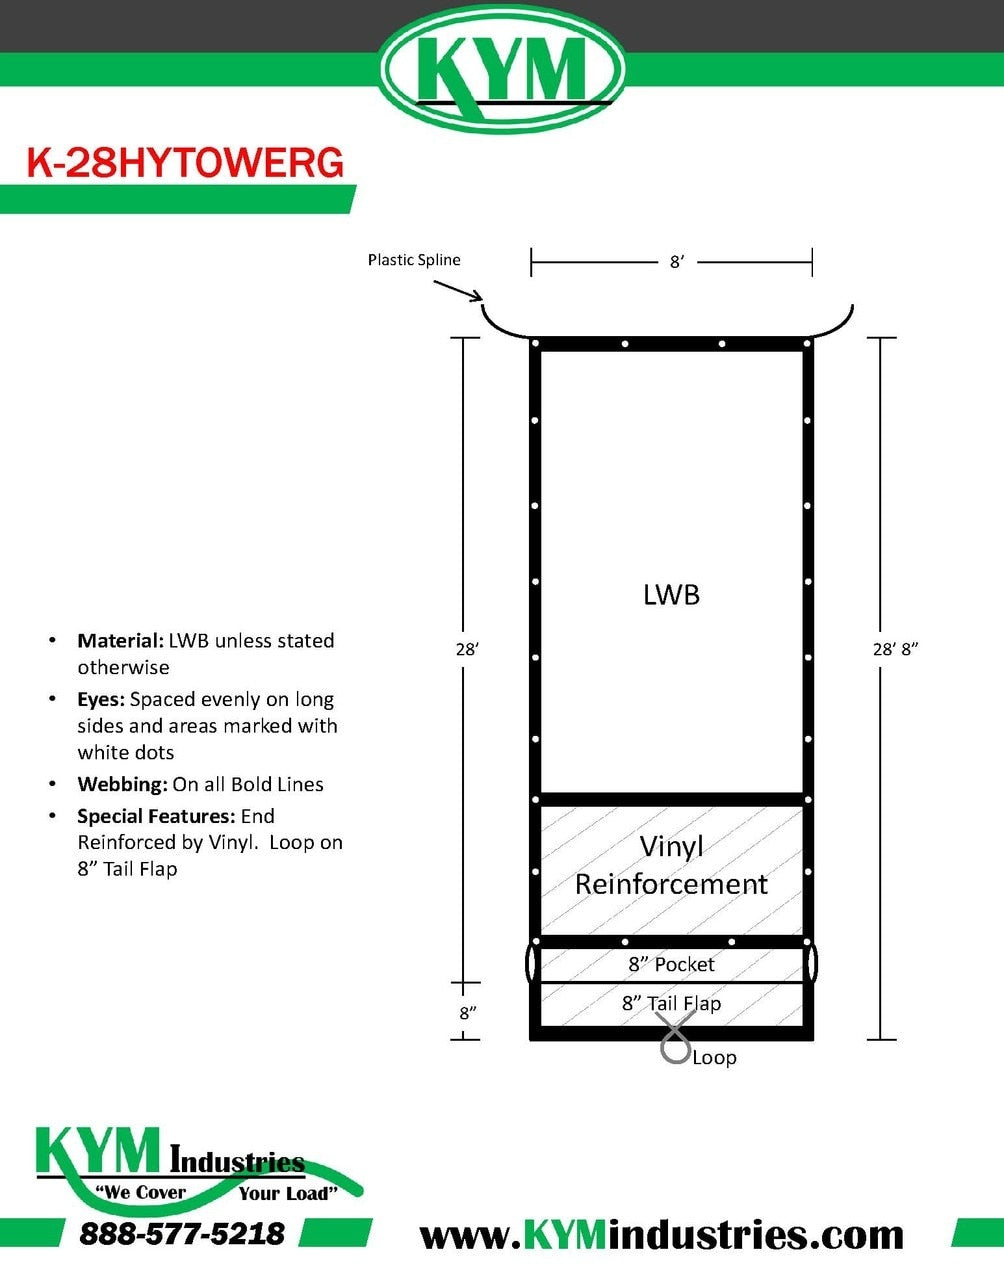 Hy-Tower Style LWB Straight Cut Tarp with Tail Flap and Plastic Spline 8' X 28'8" - kym-industries